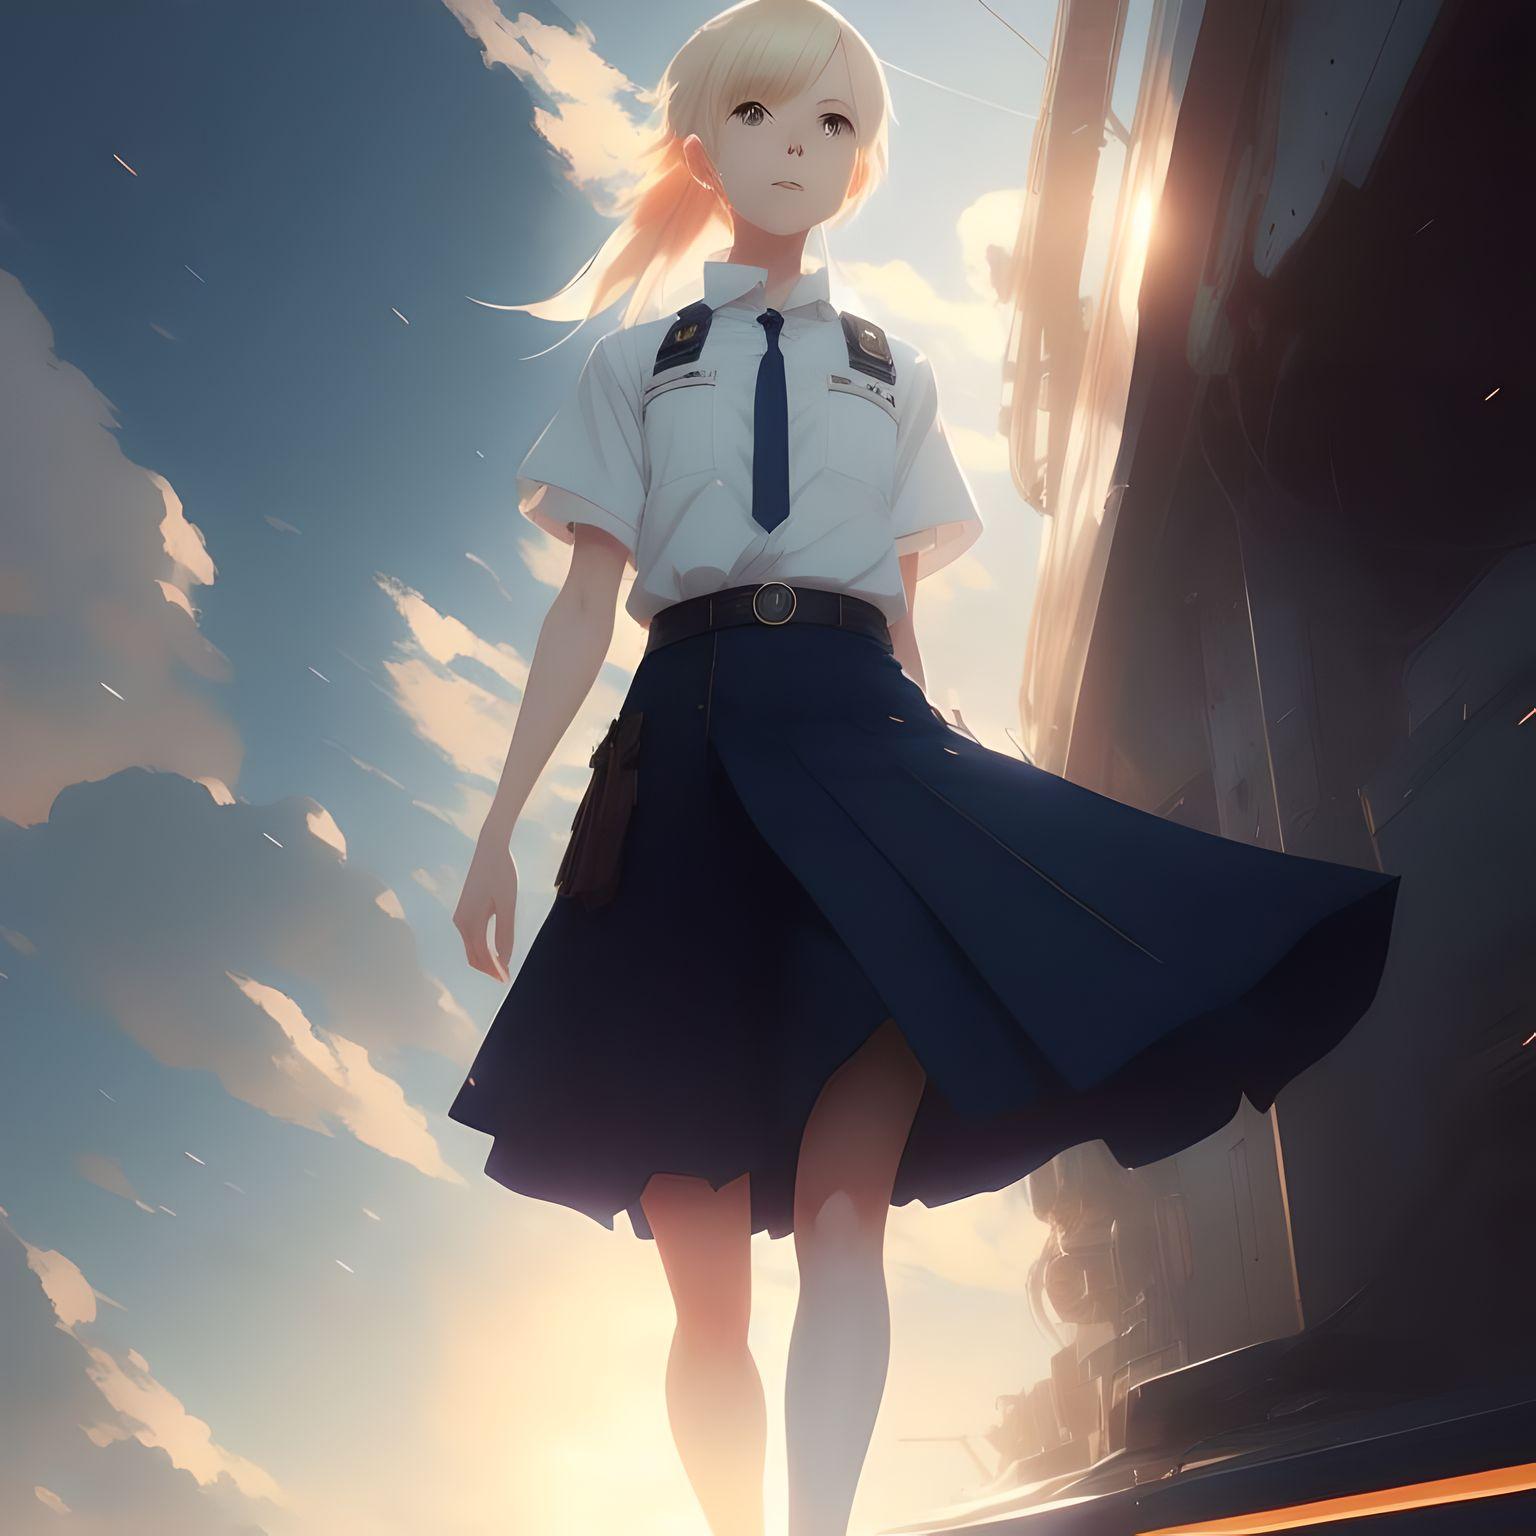 An anime illustration of a girl with blond hair and navy style skirt